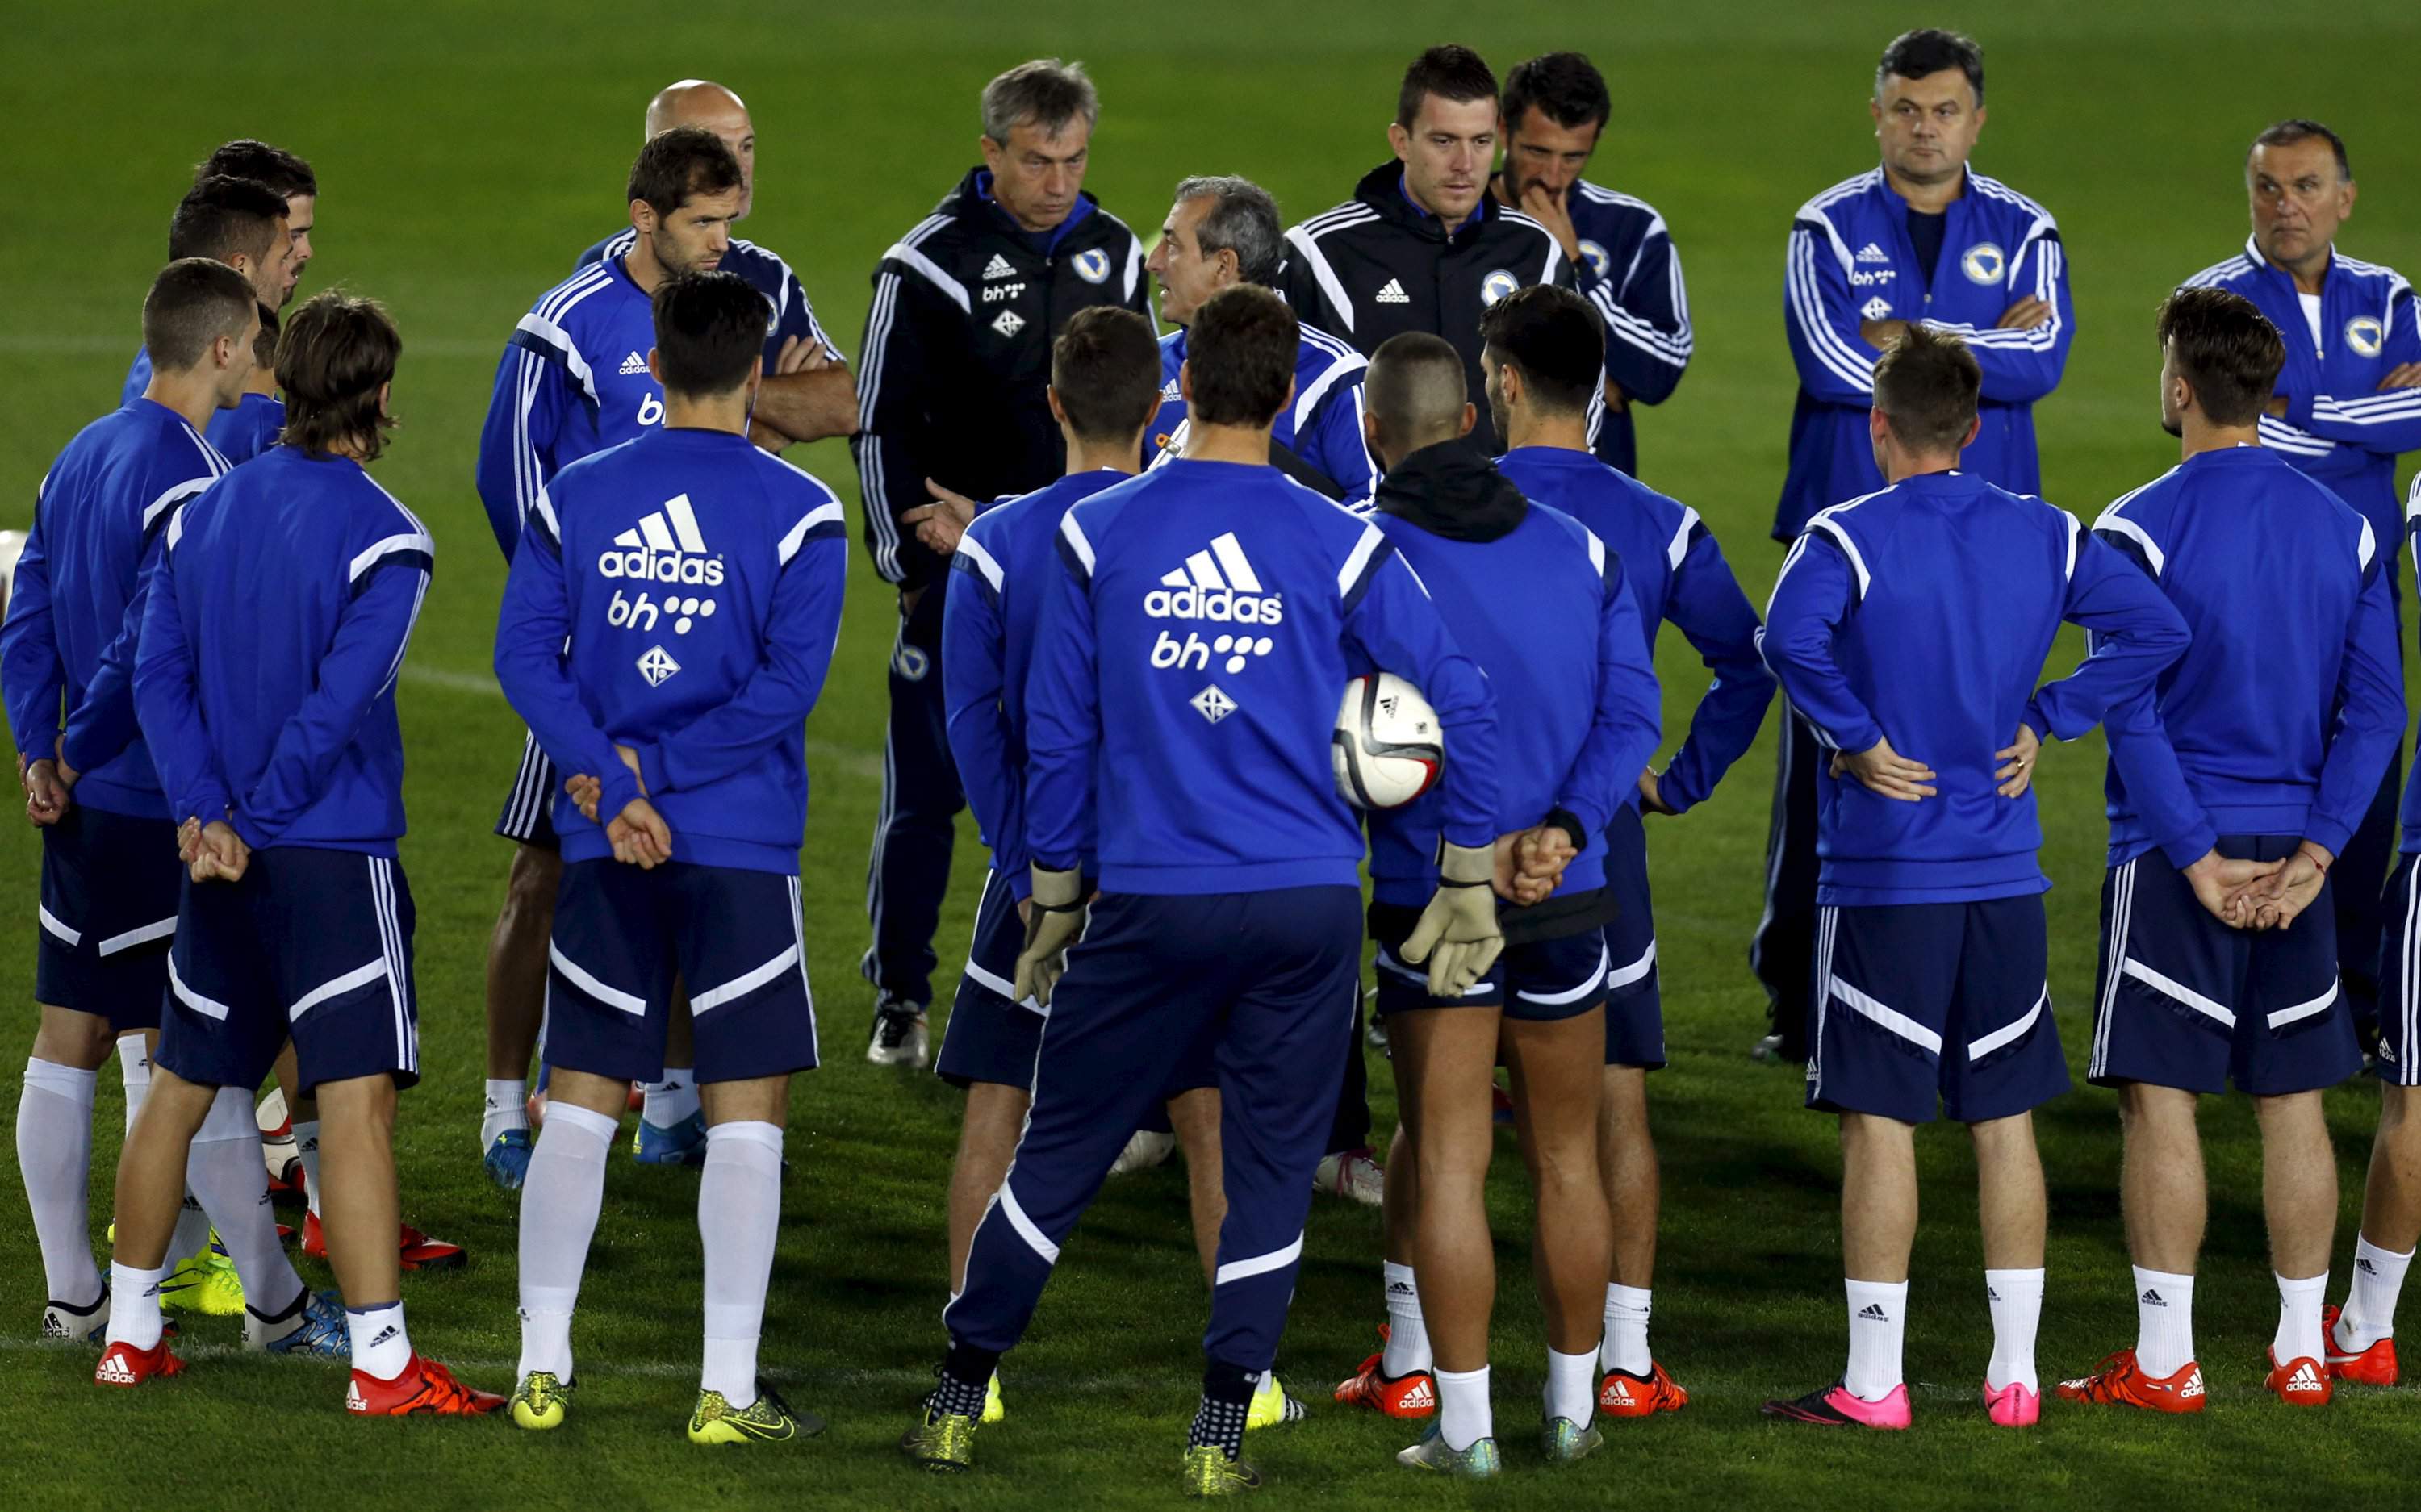 Bosnia coach Mehmed Bazdarevic (C) speaks with his players during a training session in Zenica, Bosnia and Herzegovina October 9, 2015. Bosnia will play a Euro 2016 qualifying soccer match against Wales on Saturday. REUTERS/Dado Ruvic